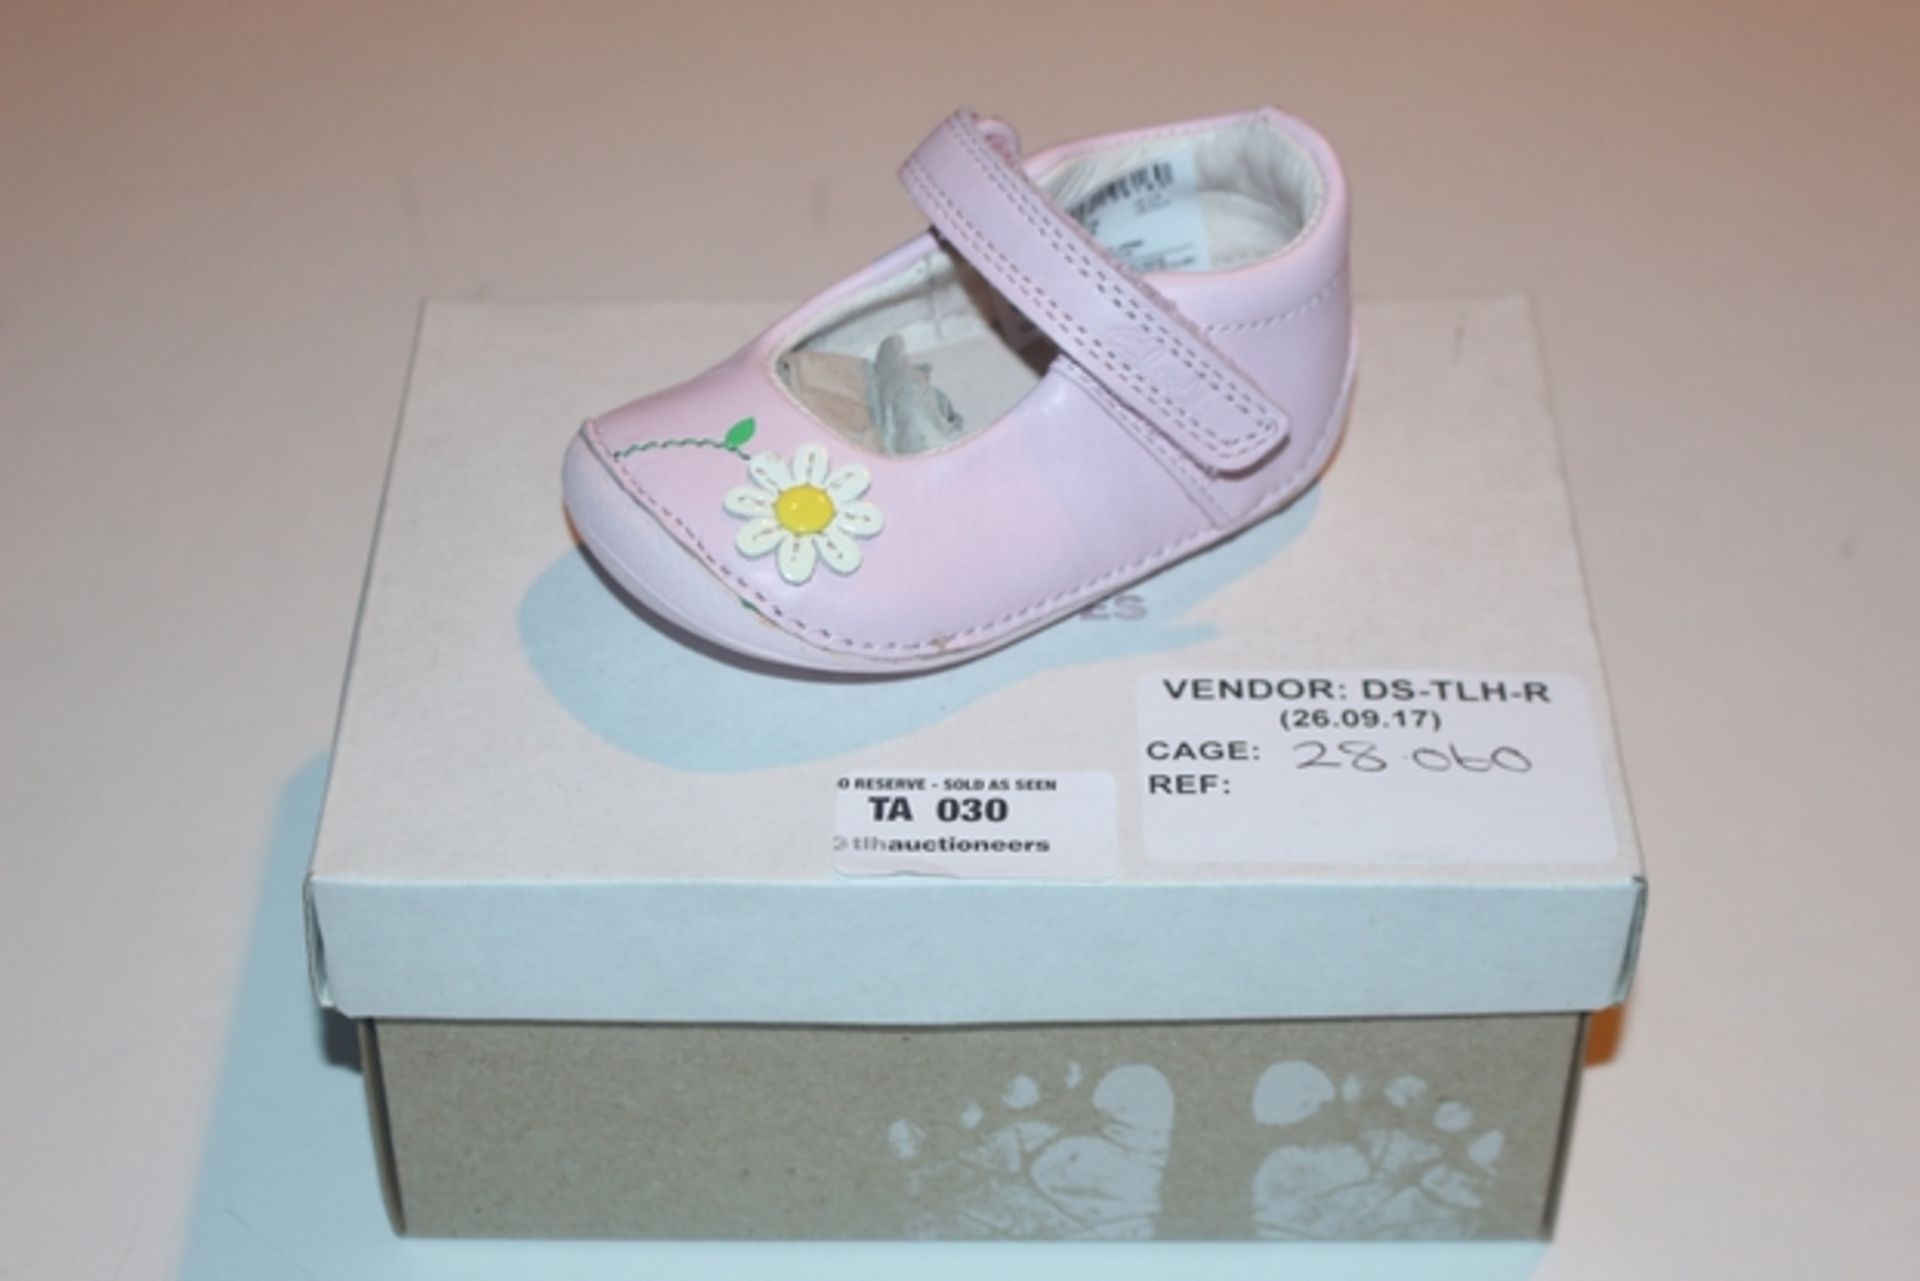 1X BOXED UNUSED PAIR OF CLARKS CHILDREN'S SHOES SIZE 2G RRP £30 (DS-TLH-R) (28.060)